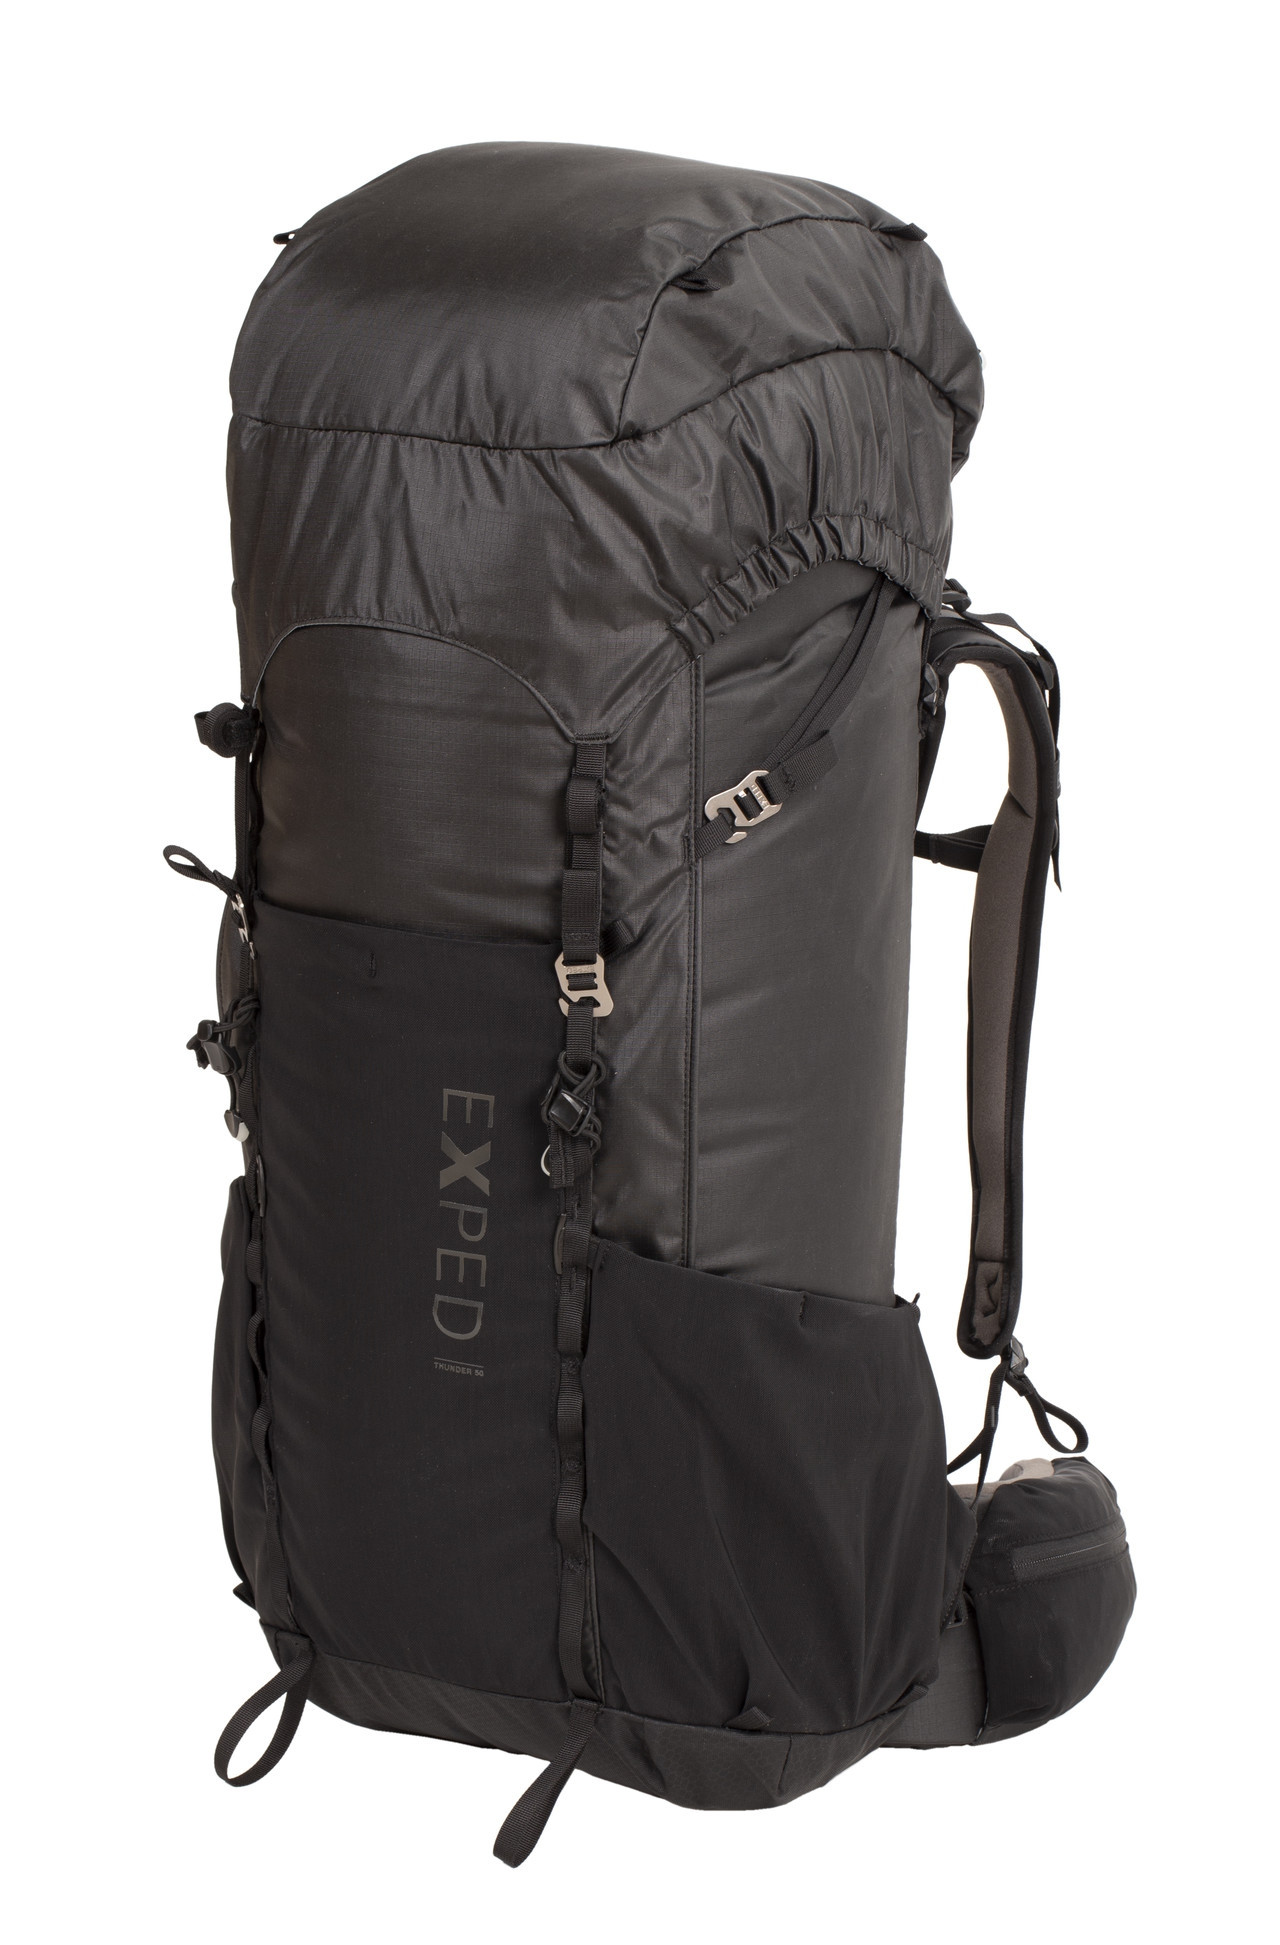 Thunder 50 Exped Lightweight comfort and versatile packing options.